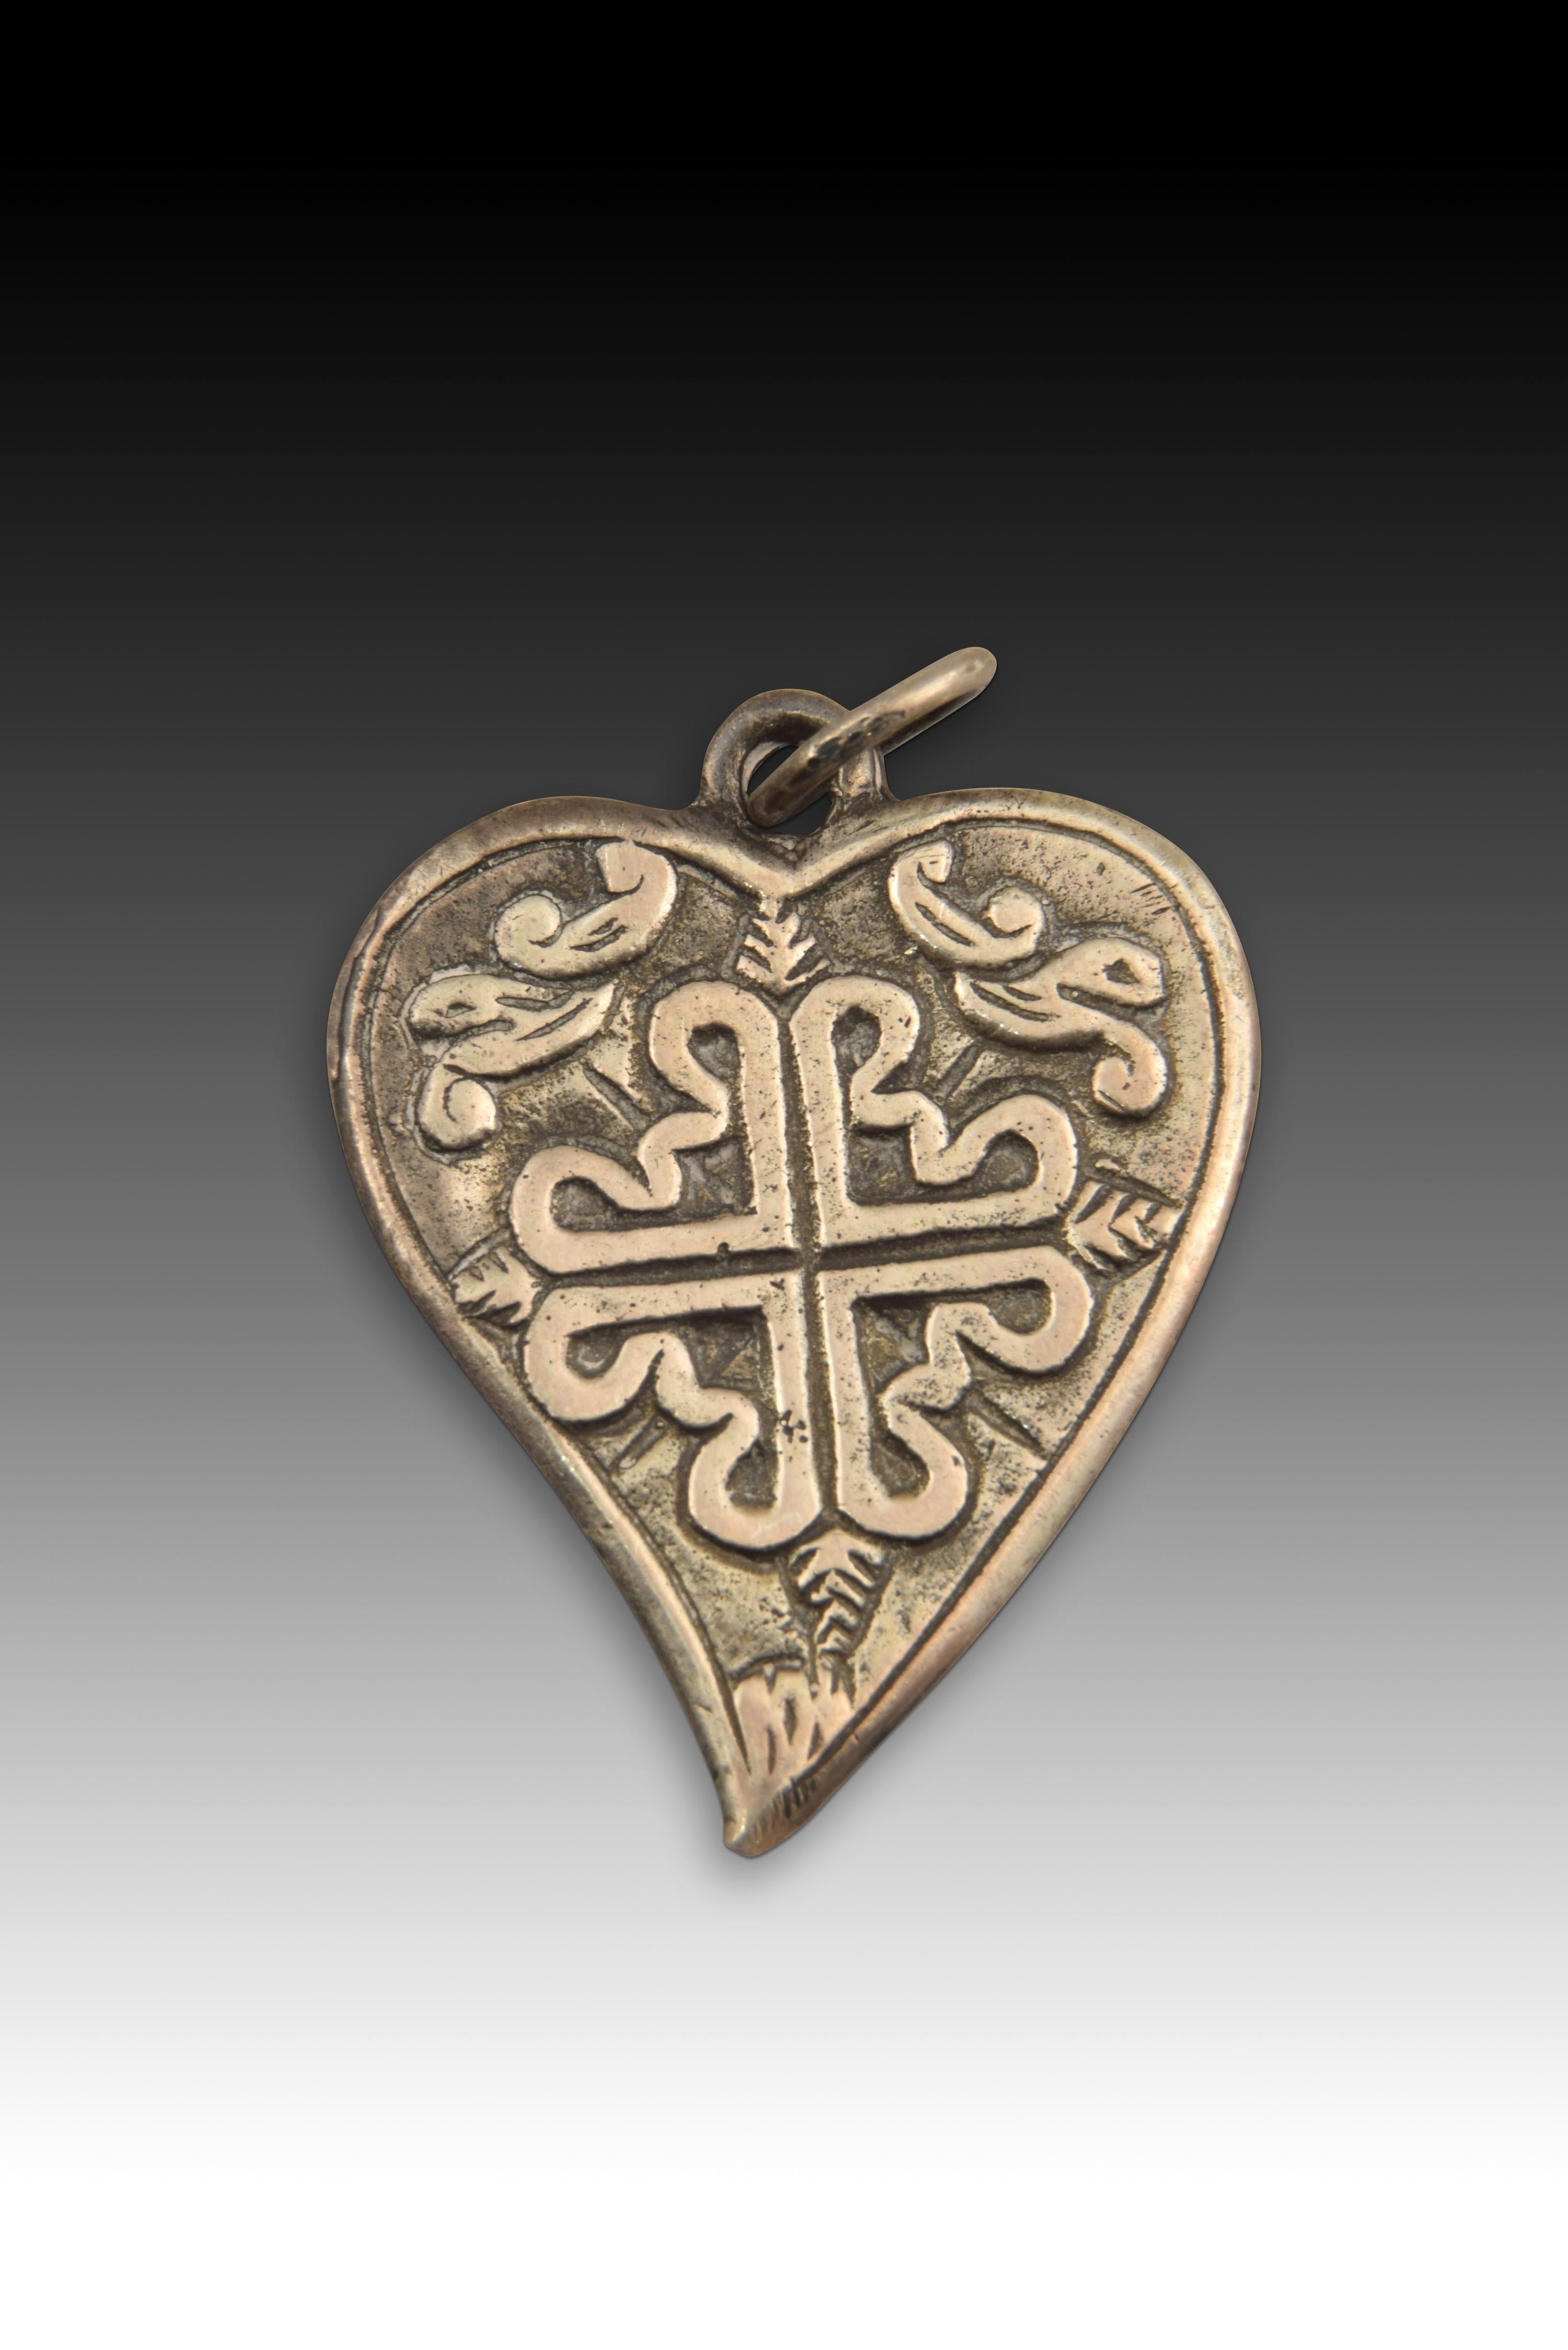 Medal; Our Lady of Snow and Dominican cross. Silver. Spain, 17th century. 
Heart-shaped devotional medal that presents, on one side, the legend 